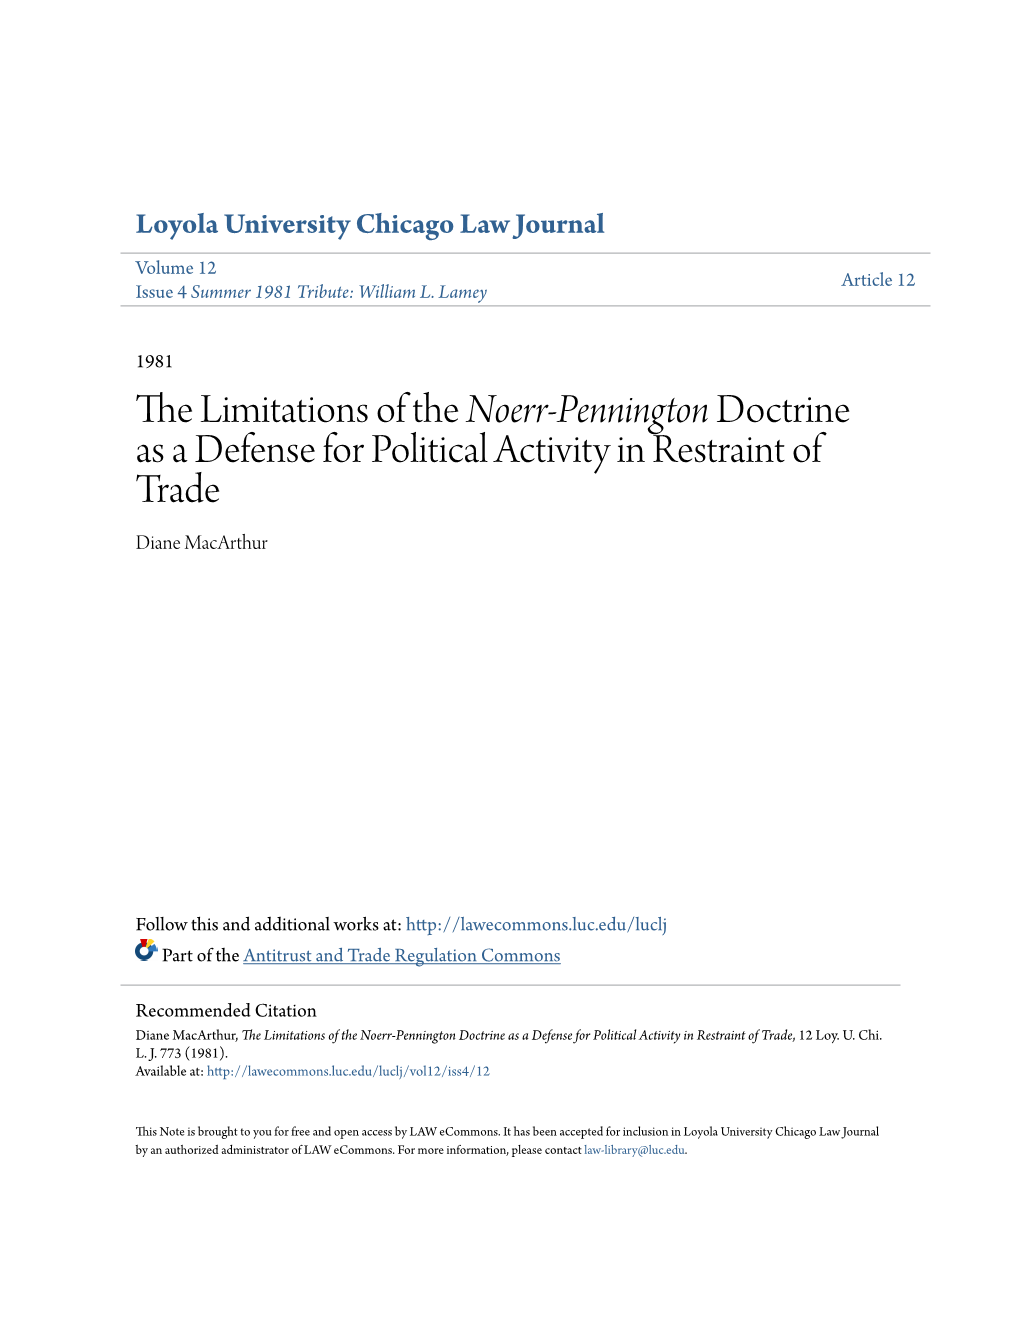 The Limitations of the Noerr-Pennington Doctrine As a Defense for Political Activity in Restraint of Trade Diane Macarthur